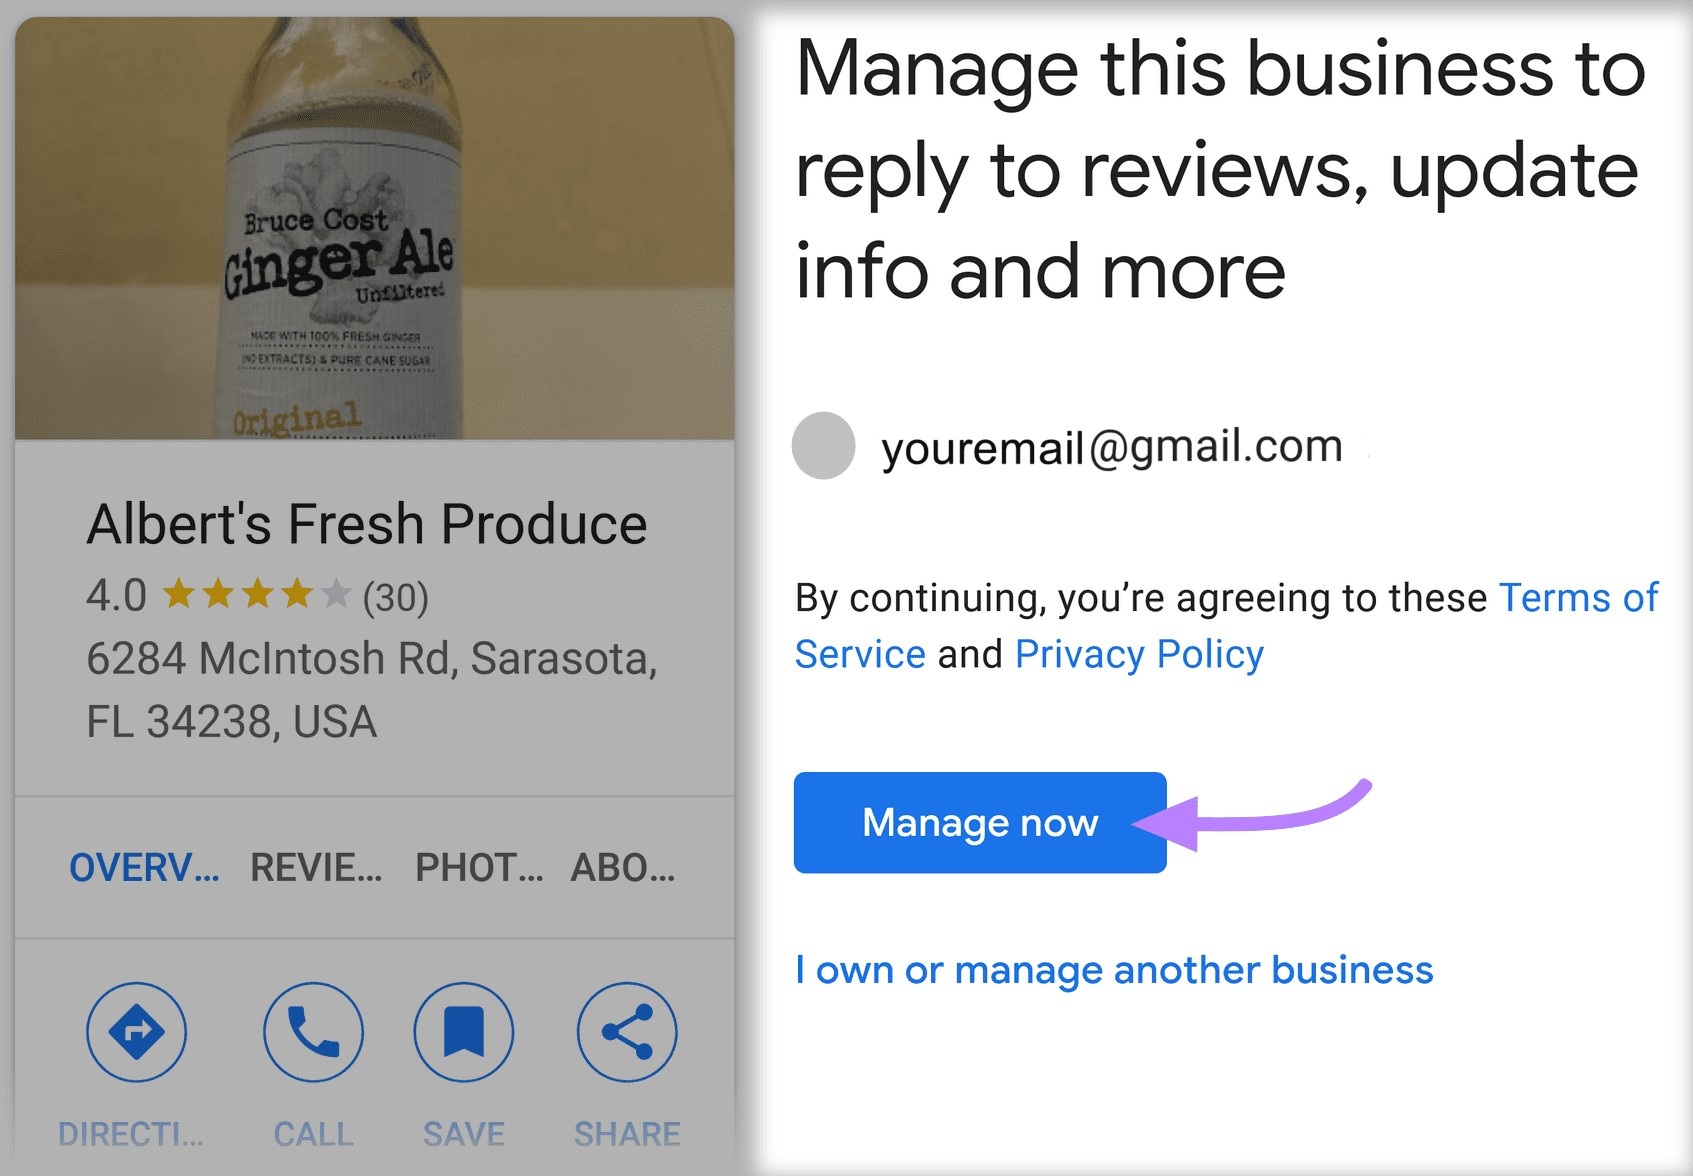 "Manage now" button highlighted for "Albert's Fresh Produce" business